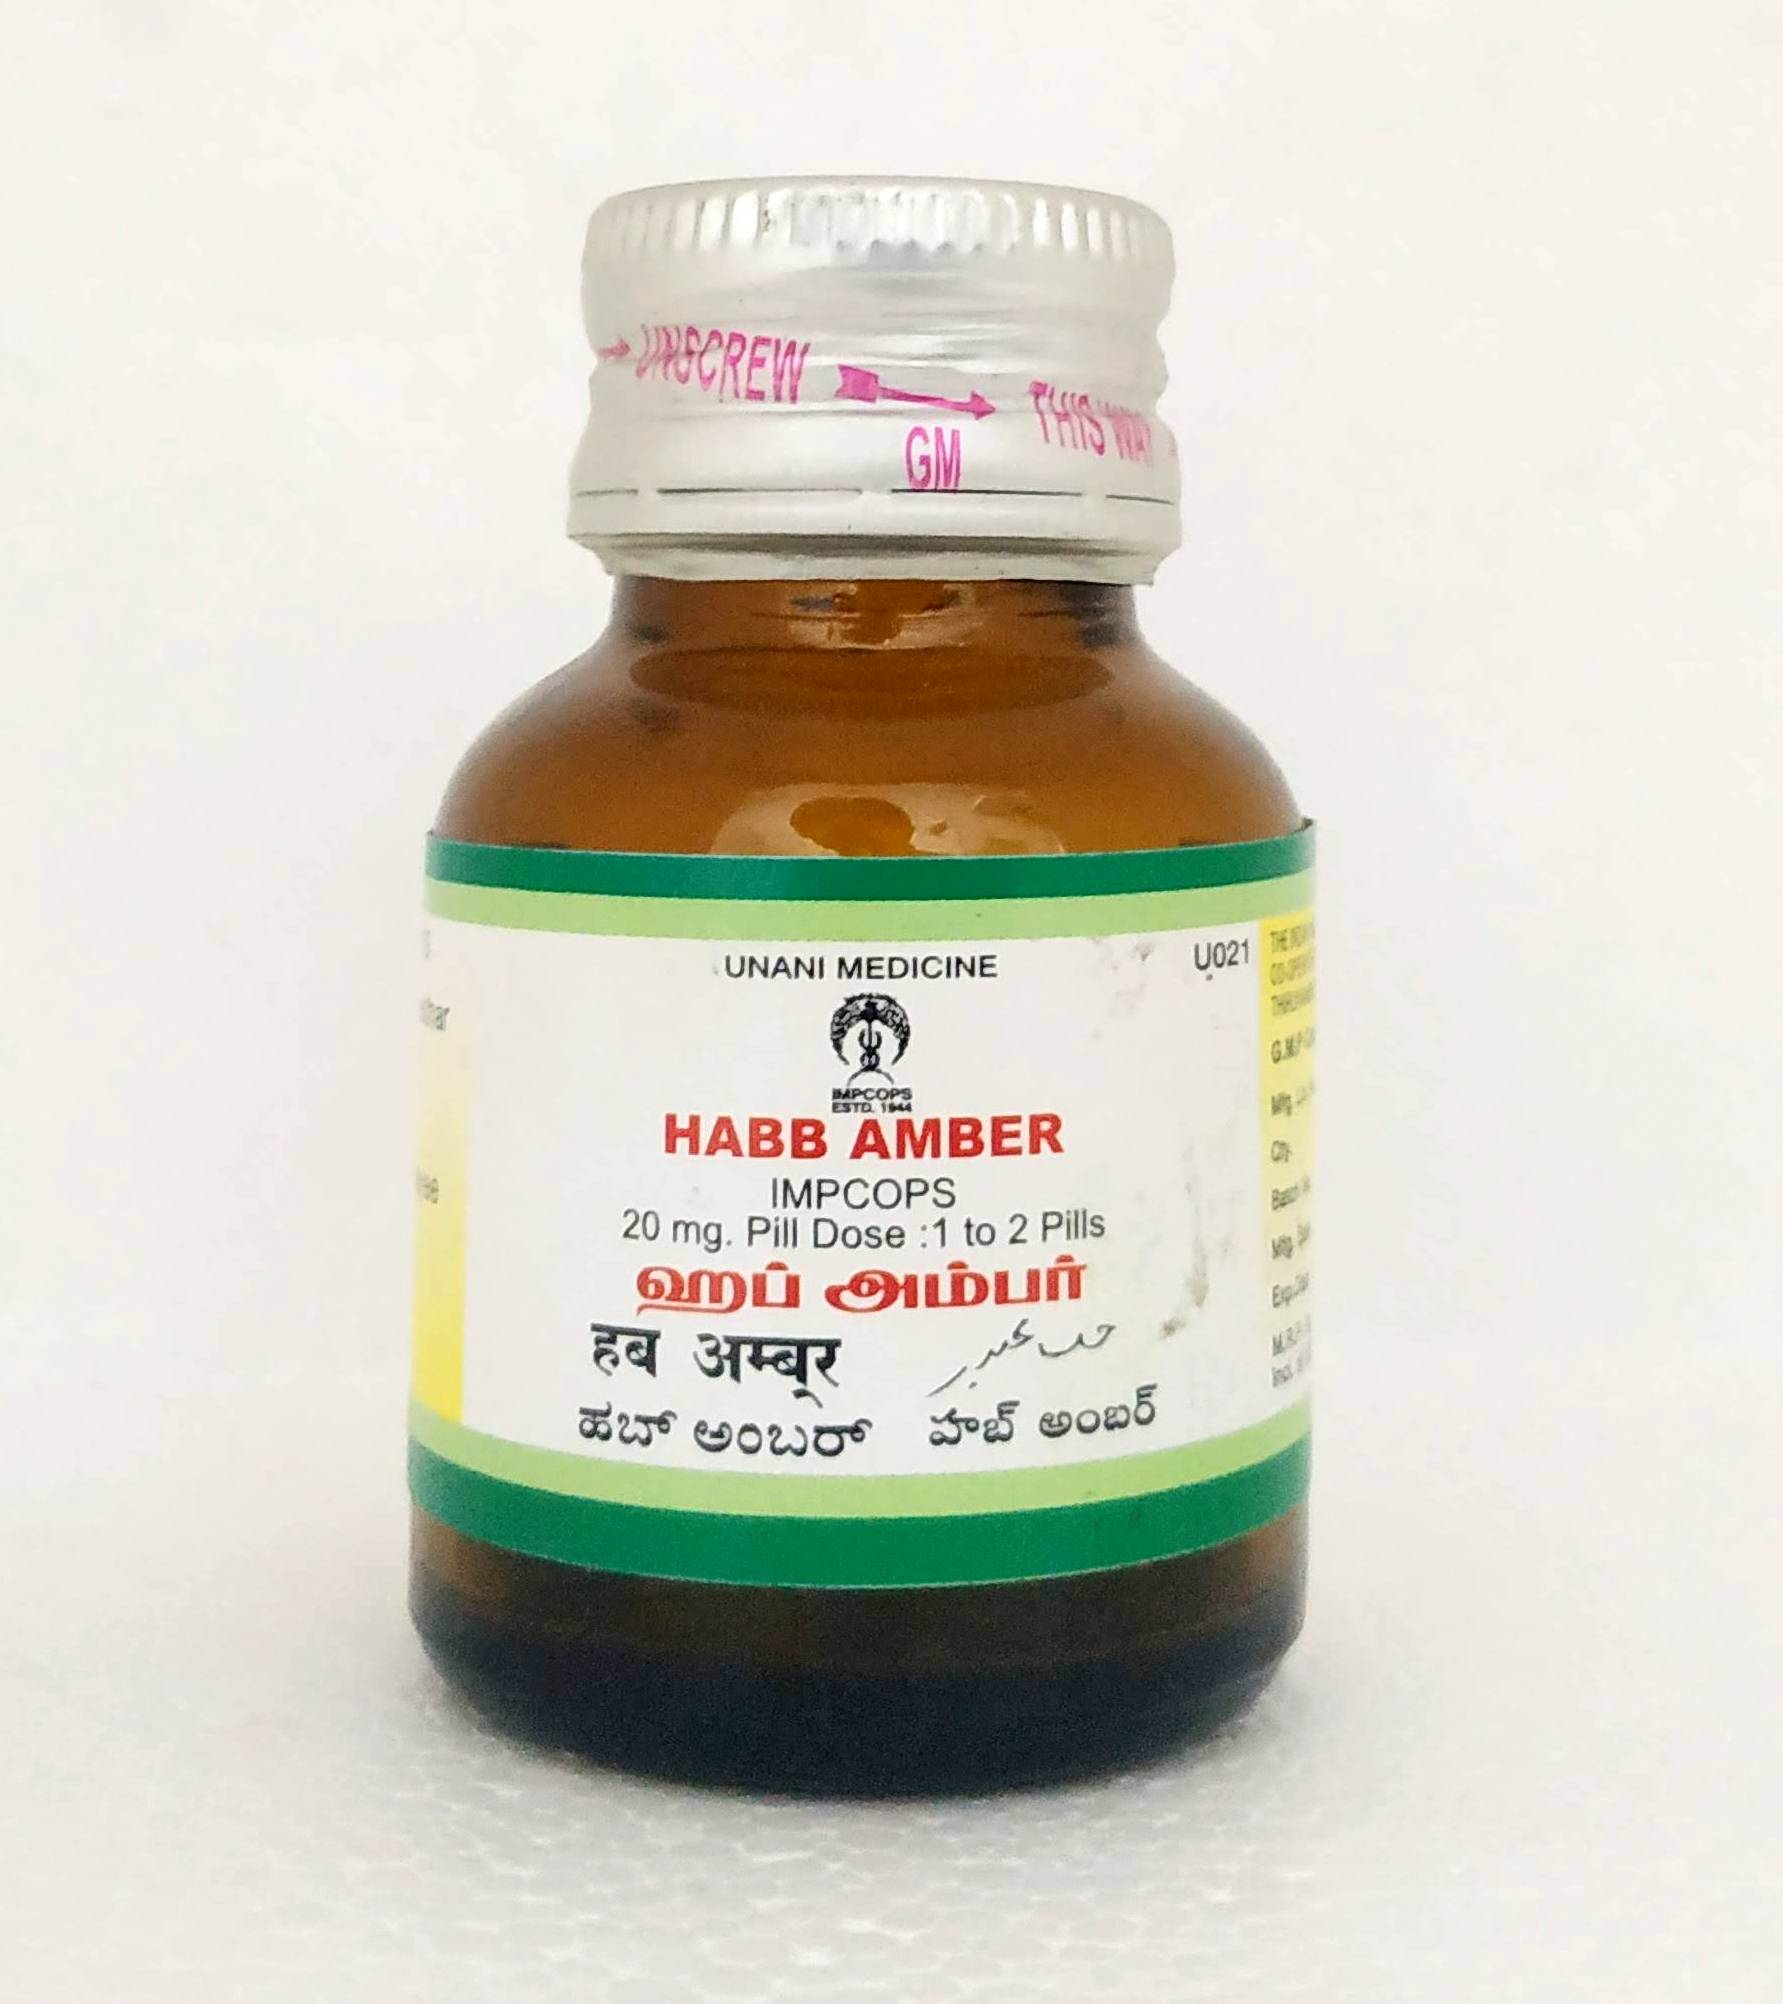 Shop Habb amber 2gm at price 1826.00 from Impcops Online - Ayush Care